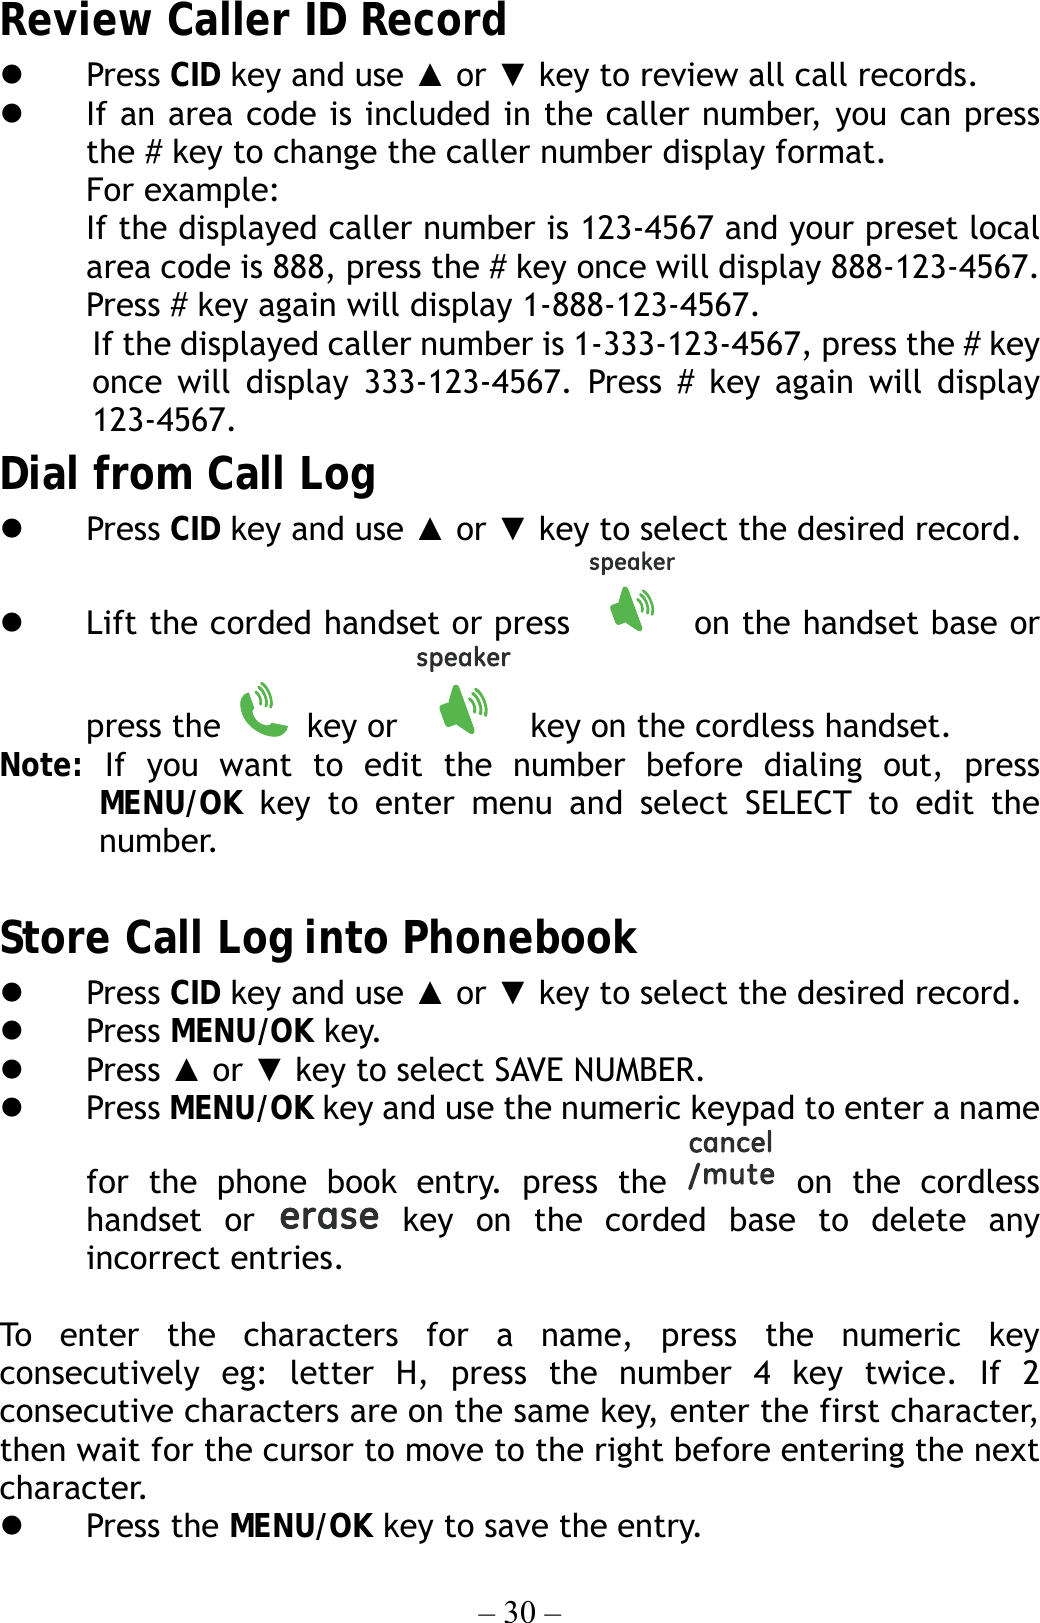 – 30 – Review Caller ID Record   Press CID key and use ▲ or ▼ key to review all call records.   If an area code is included in the caller number, you can press the # key to change the caller number display format. For example: If the displayed caller number is 123-4567 and your preset local area code is 888, press the # key once will display 888-123-4567. Press # key again will display 1-888-123-4567. If the displayed caller number is 1-333-123-4567, press the # key once will display 333-123-4567. Press # key again will display 123-4567. Dial from Call Log   Press CID key and use ▲ or ▼ key to select the desired record.   Lift the corded handset or press   on the handset base or press the   key or    key on the cordless handset. Note:  If you want to edit the number before dialing out, press MENU/OK key to enter menu and select SELECT to edit the  number.  Store Call Log into Phonebook   Press CID key and use ▲ or ▼ key to select the desired record.   Press MENU/OK key.   Press ▲ or ▼ key to select SAVE NUMBER.   Press MENU/OK key and use the numeric keypad to enter a name for the phone book entry. press the   on the cordless handset or   key on the corded base to delete any incorrect entries.  To enter the characters for a name, press the numeric key consecutively eg: letter H, press the number 4 key twice. If 2 consecutive characters are on the same key, enter the first character, then wait for the cursor to move to the right before entering the next character.    Press the MENU/OK key to save the entry. 